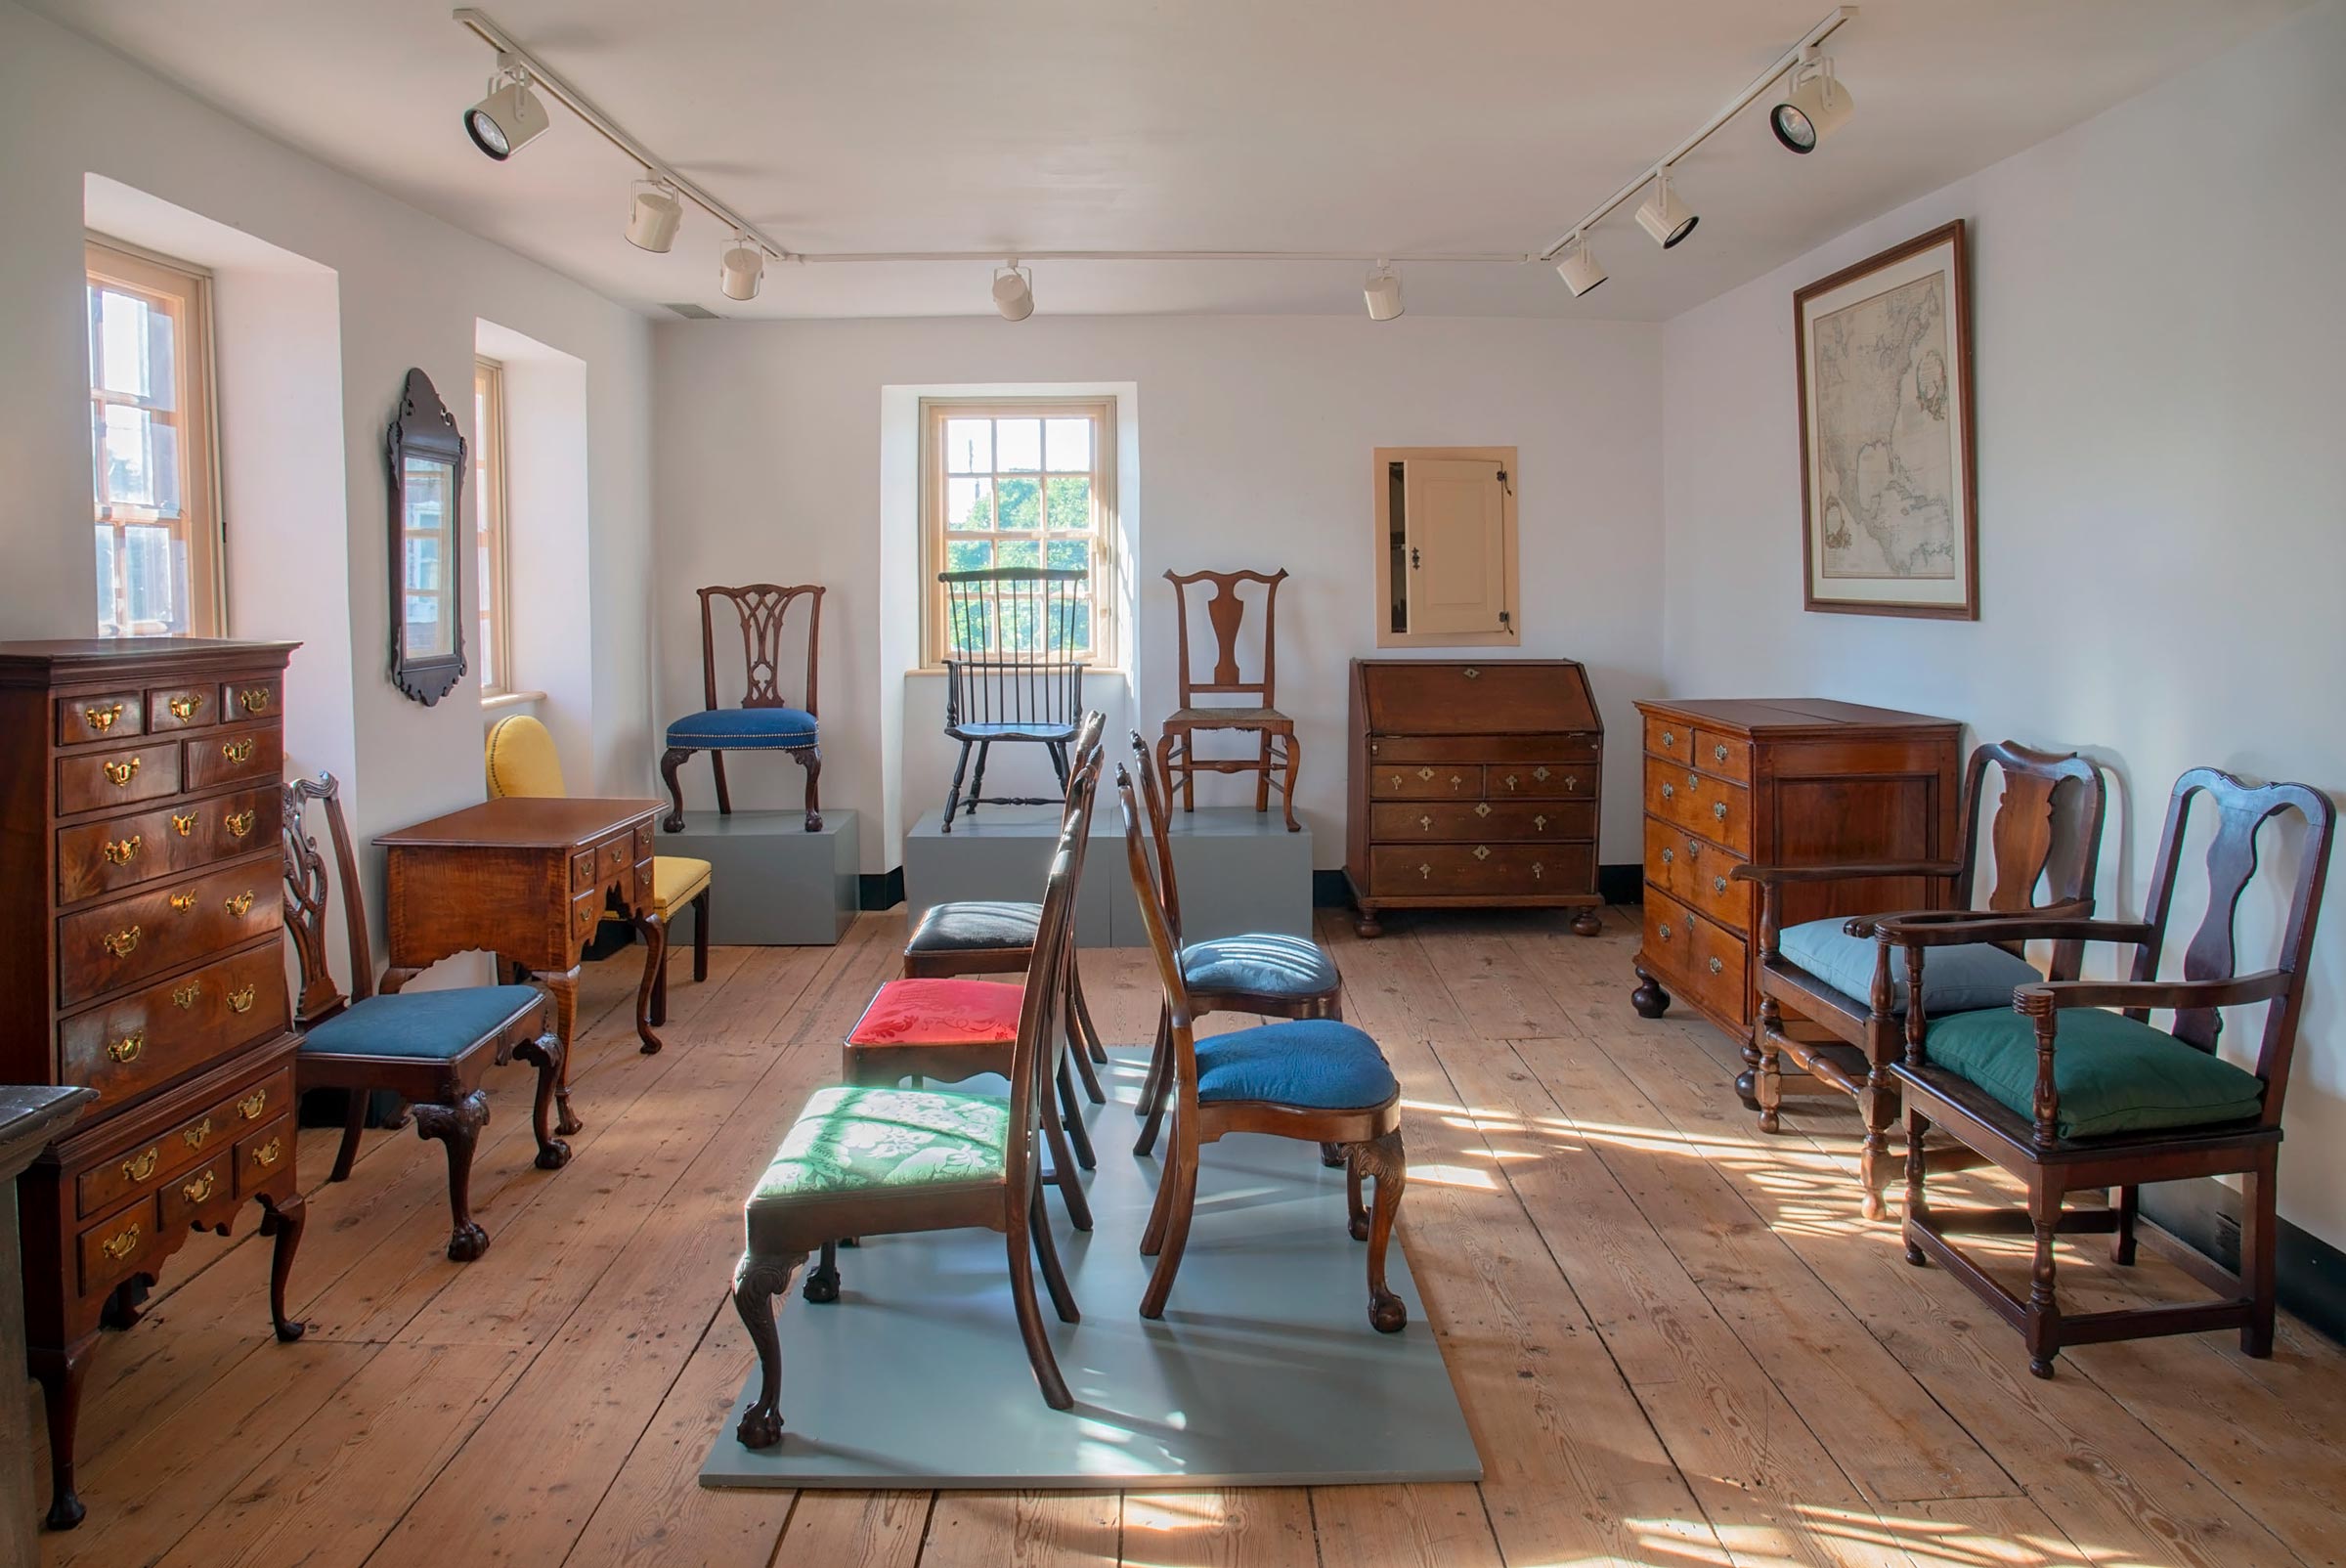 Furniture gallery at the Henry Muhlenberg House